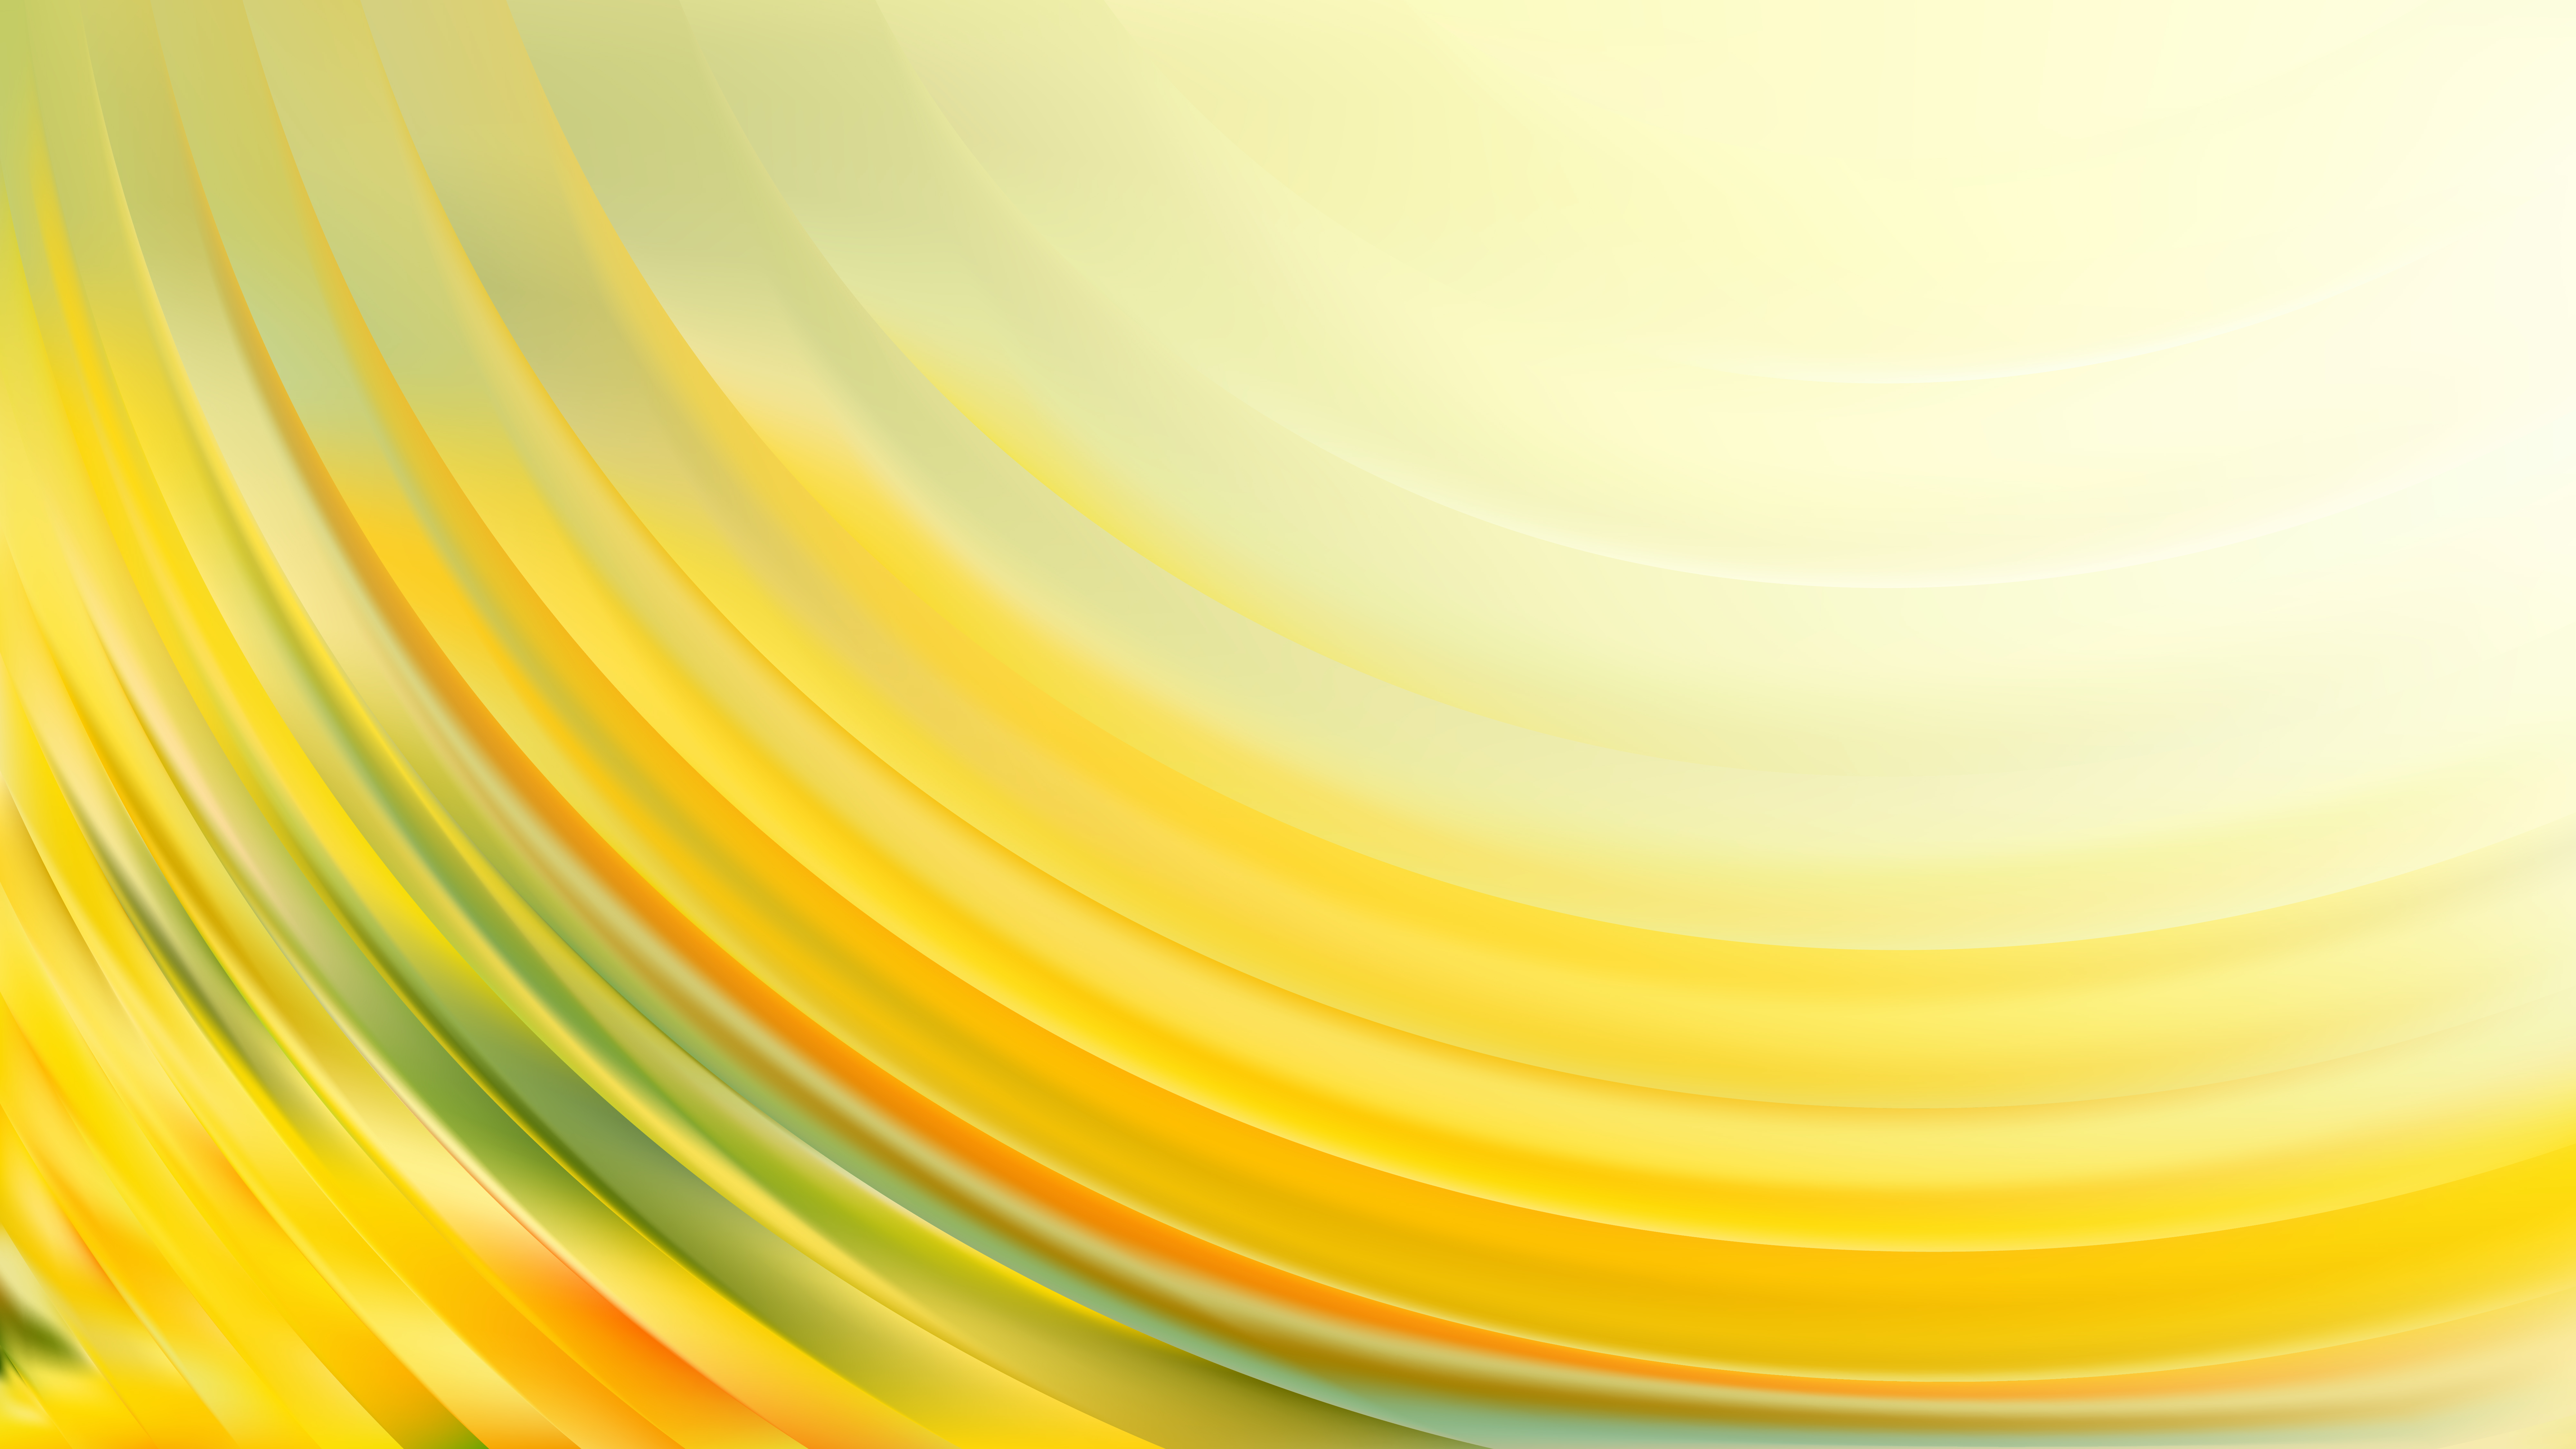 Free Light Yellow Wave Background Vector Art